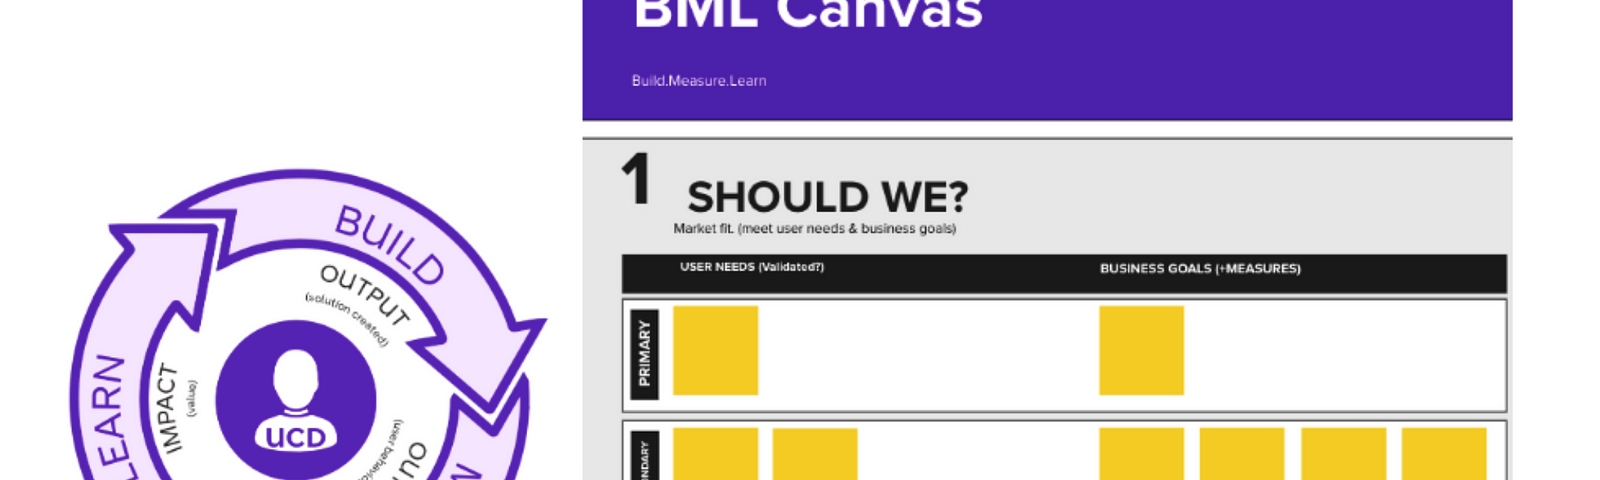 An image of BT Design’s ‘Build, Measure, Learn’ canvas.